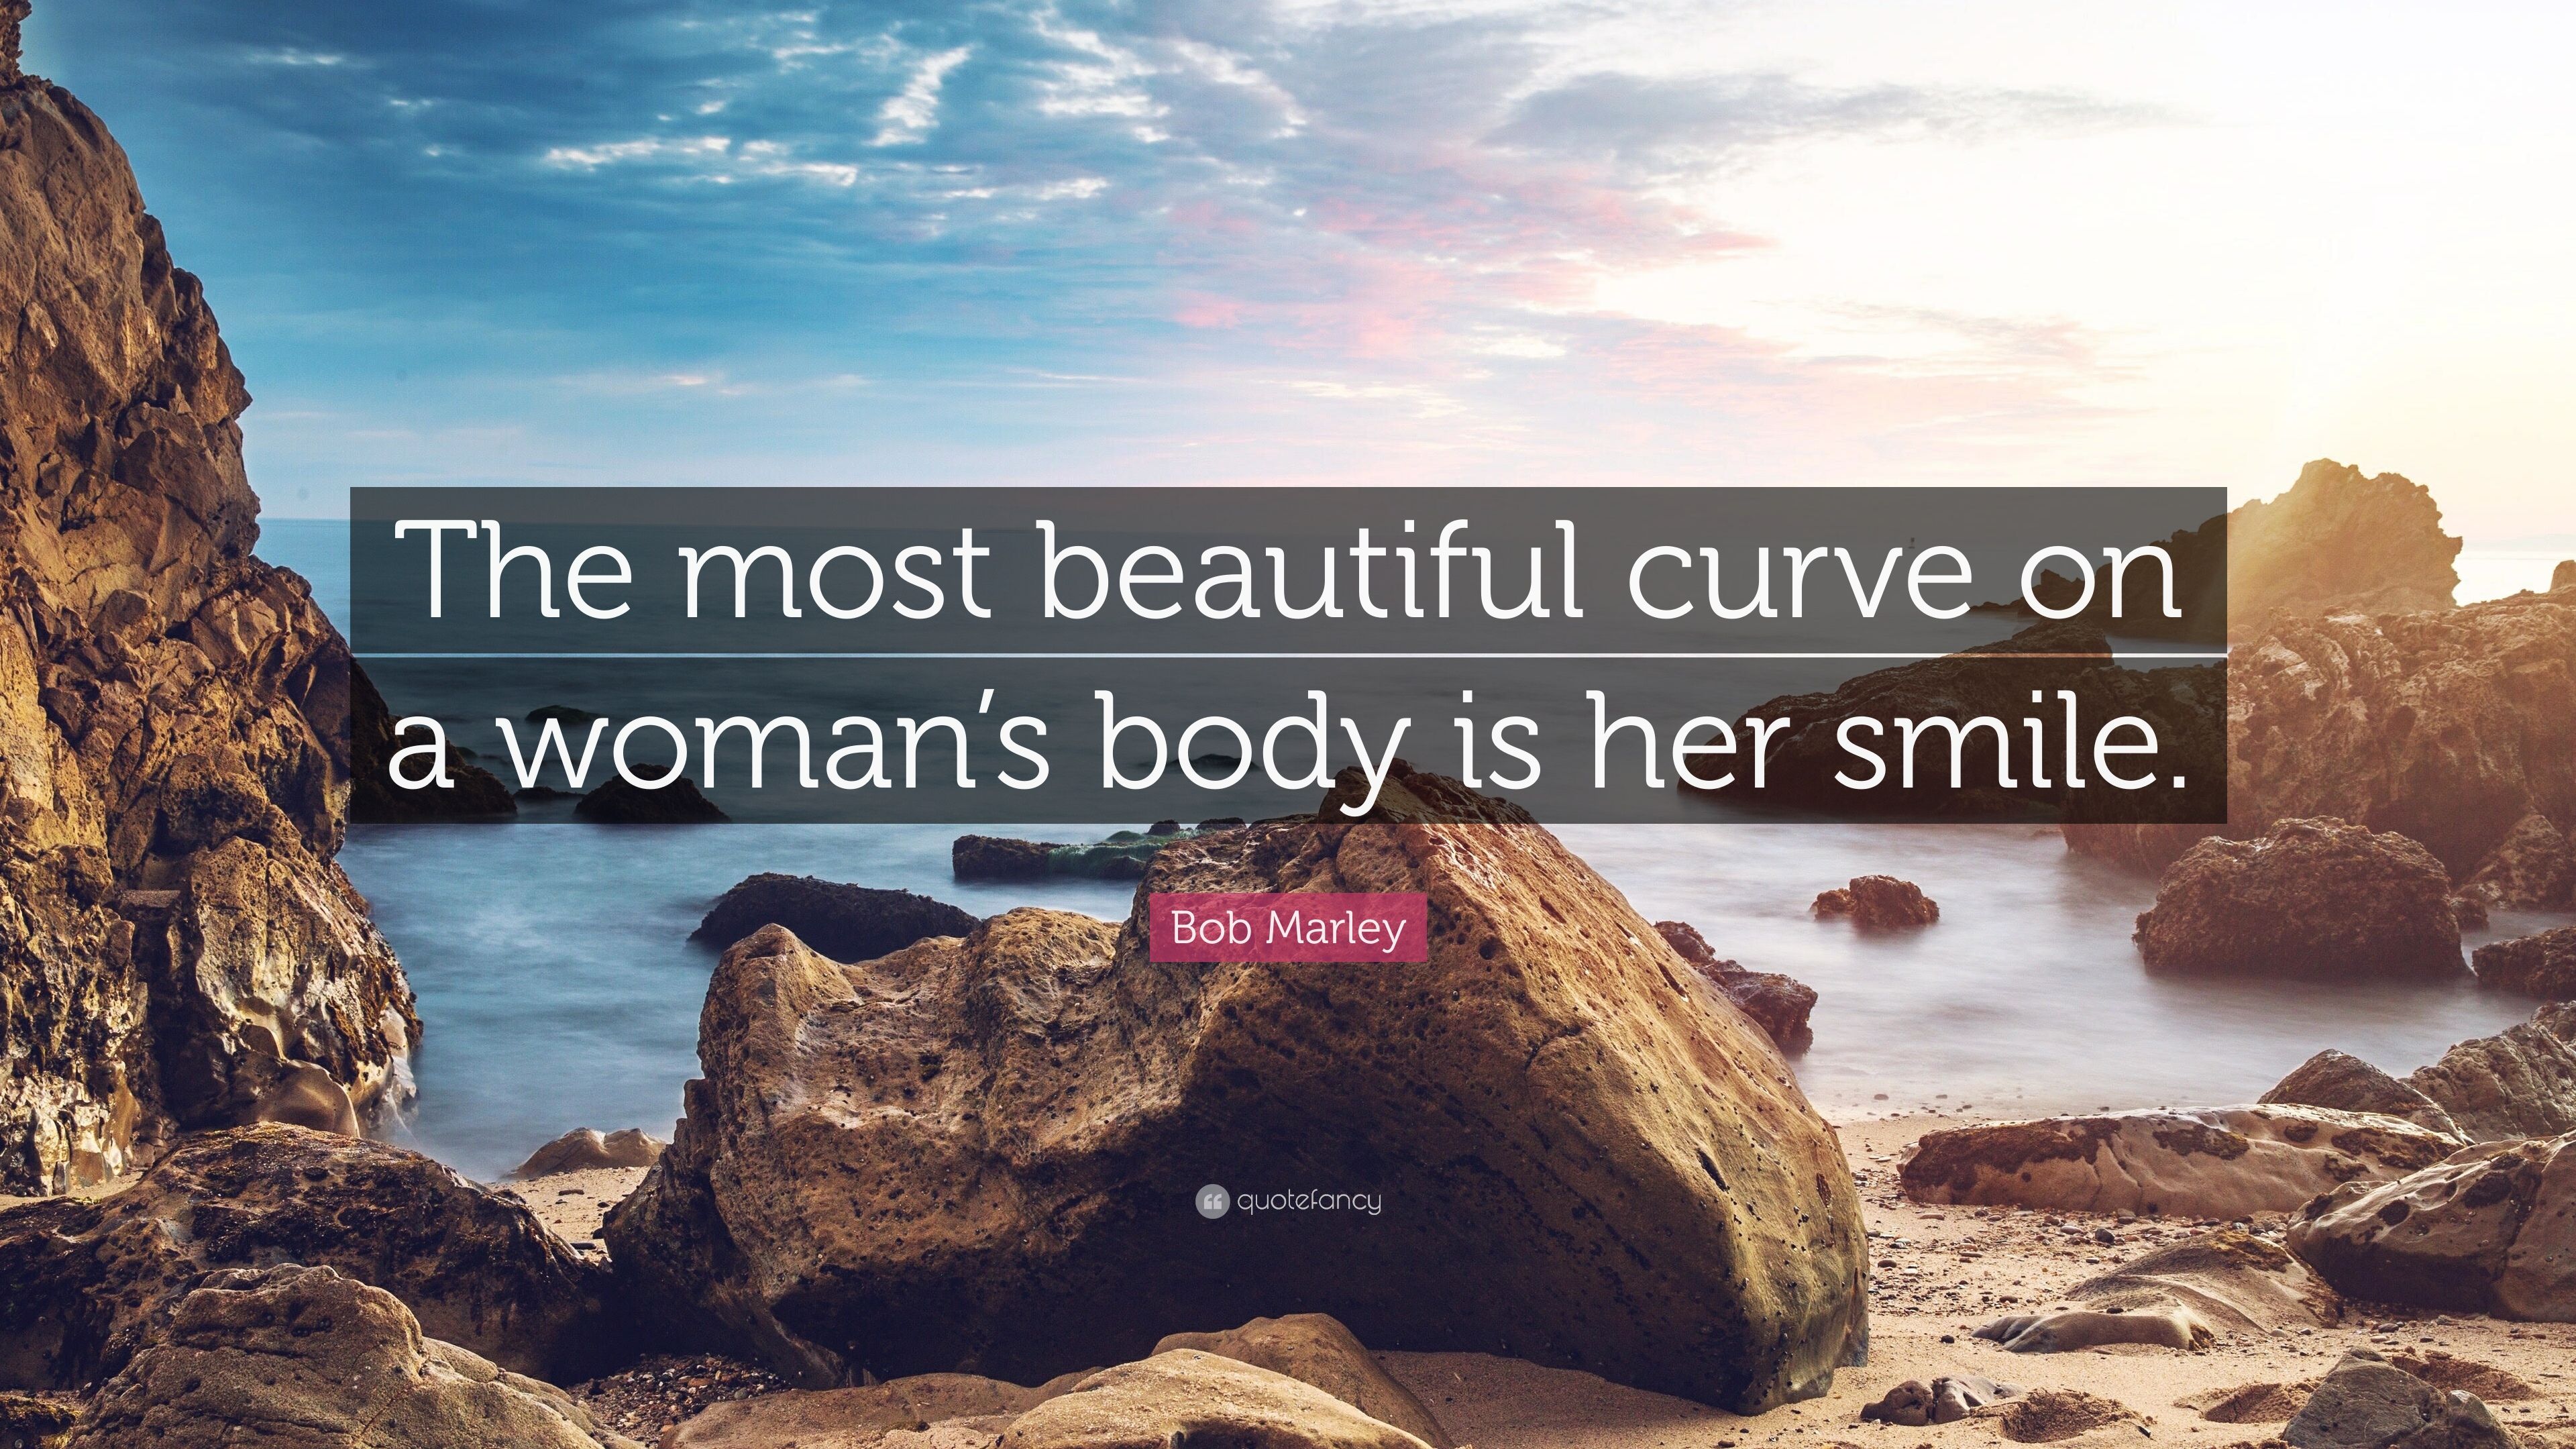 Bob Marley Quote: “The most beautiful curve on a woman's body is